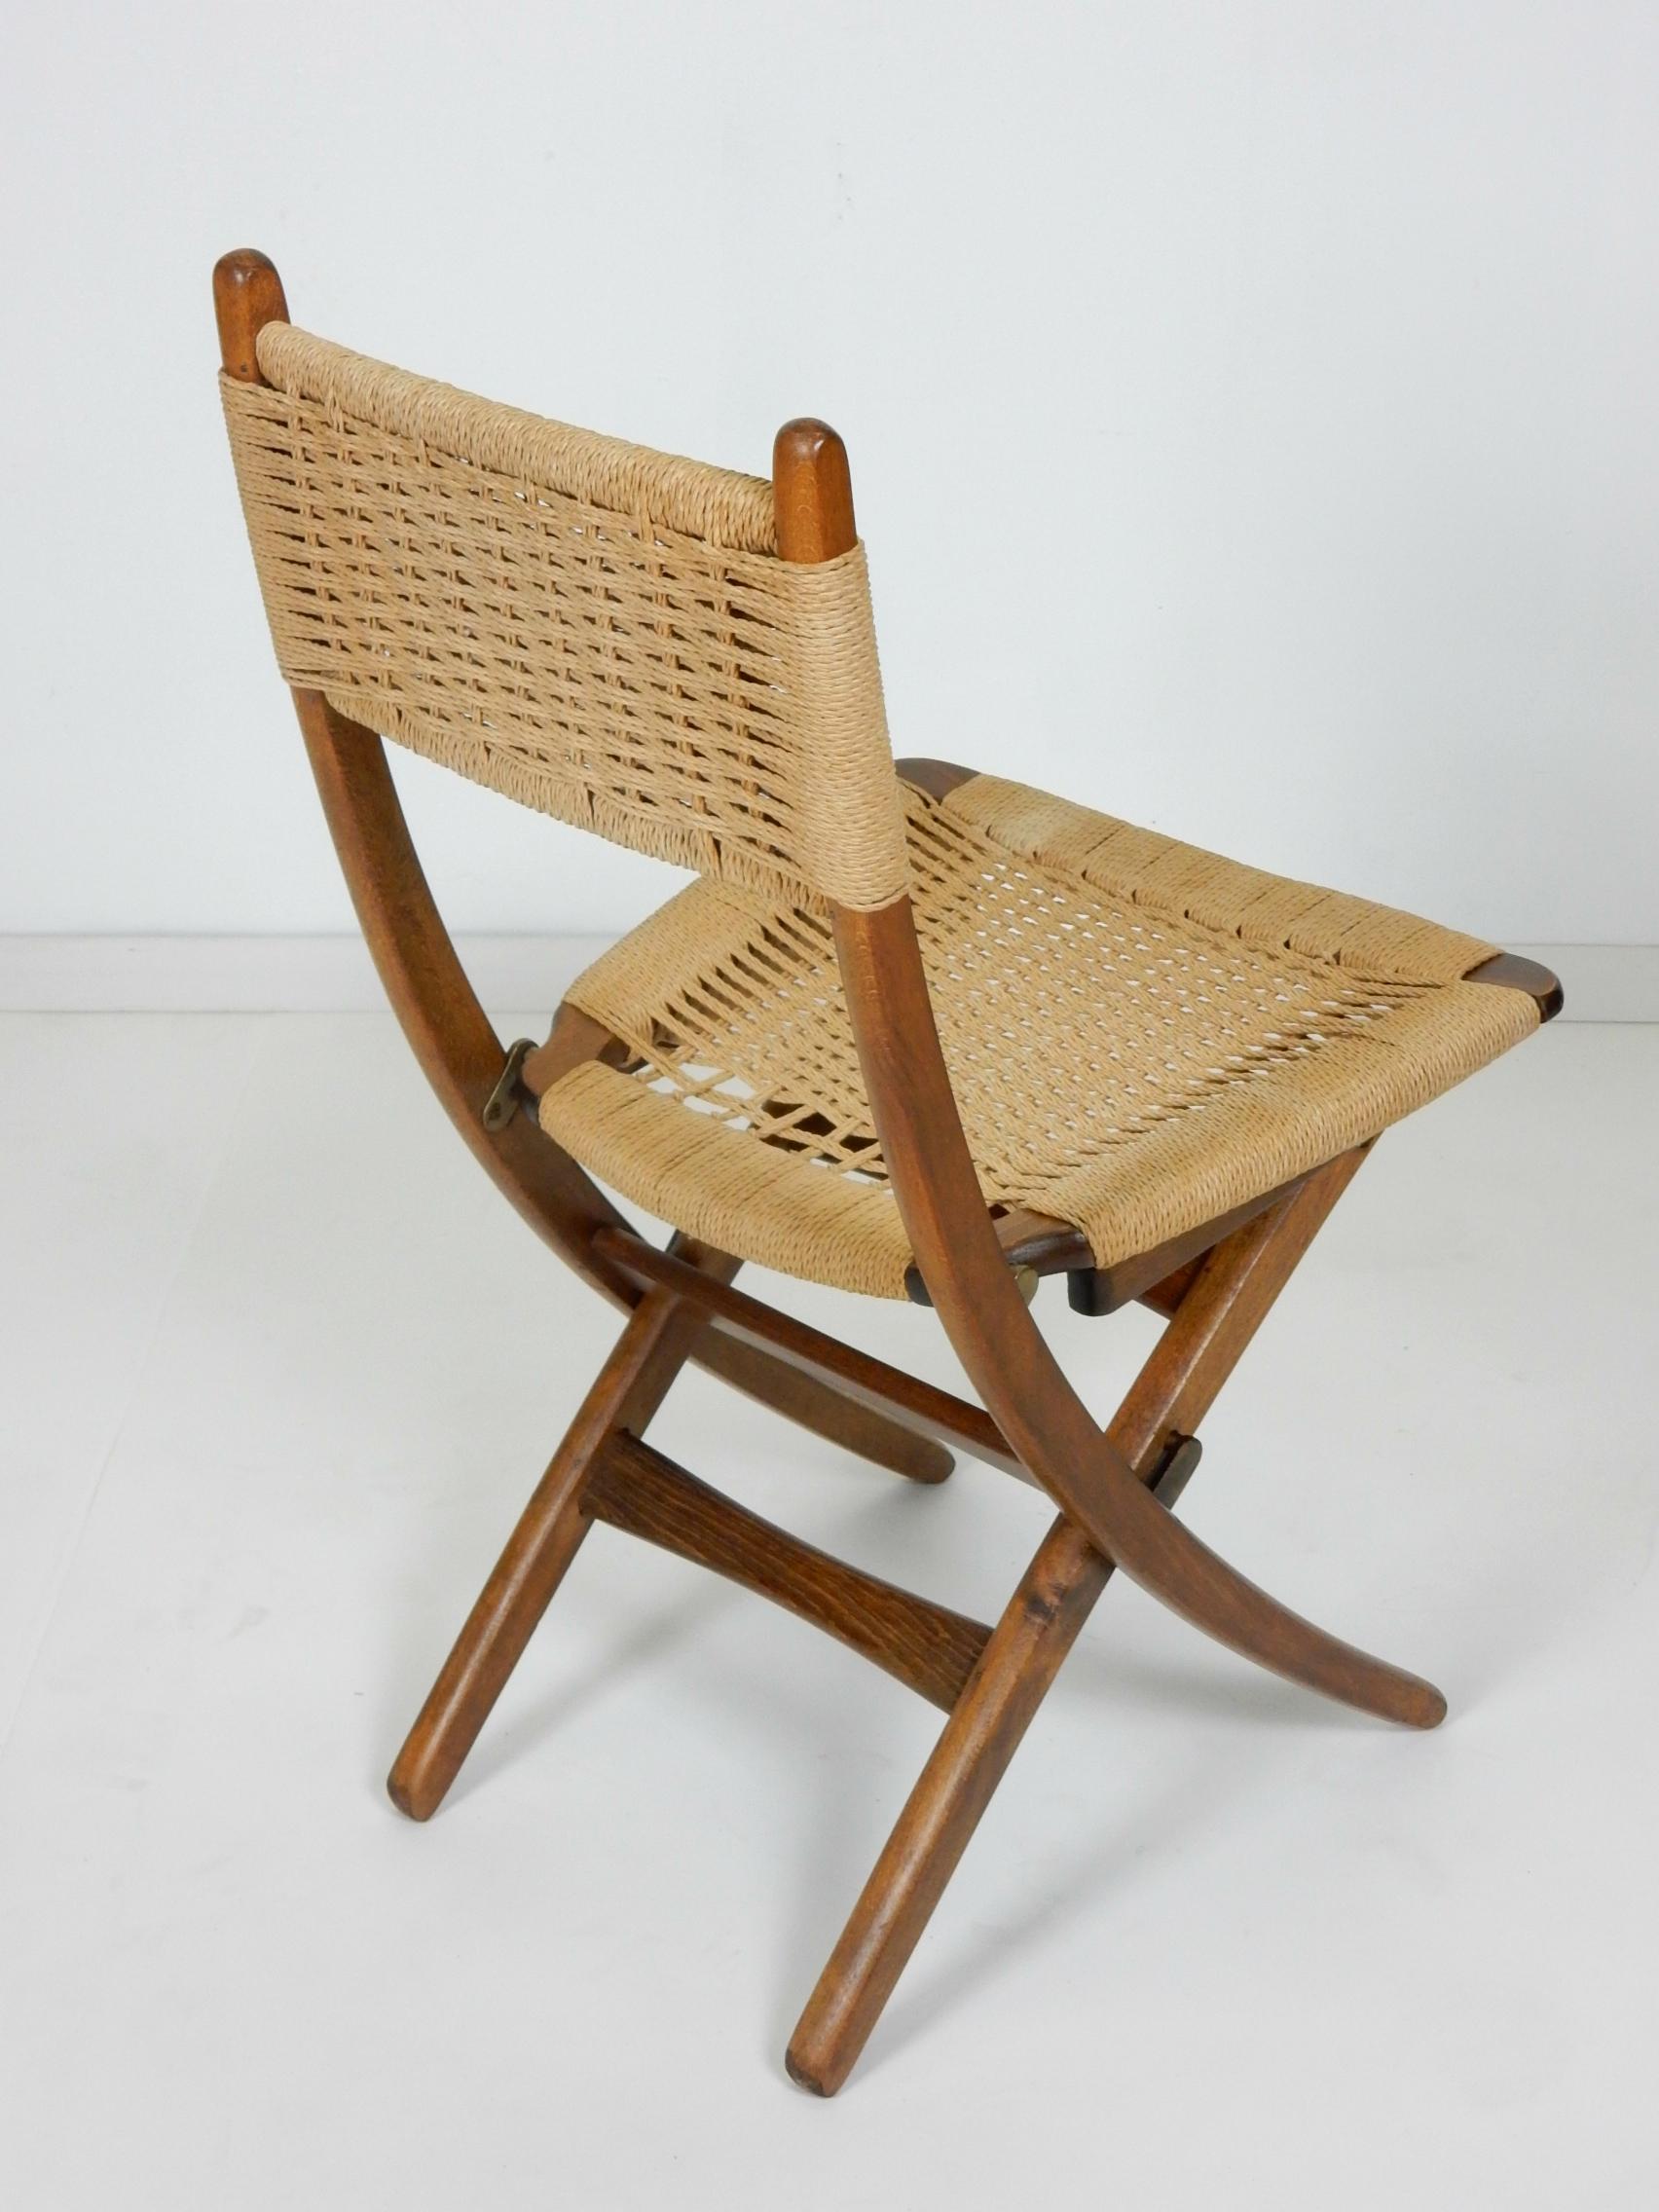 Set of 6 rope upholstered scissor chairs(4 pictured), circa 1950s
in the style of Danish designer Hans Wegner. 
Each folds for ease of storage.
Brass hardware with natural rope woven seat and back.
All are in very good condition with no damage or